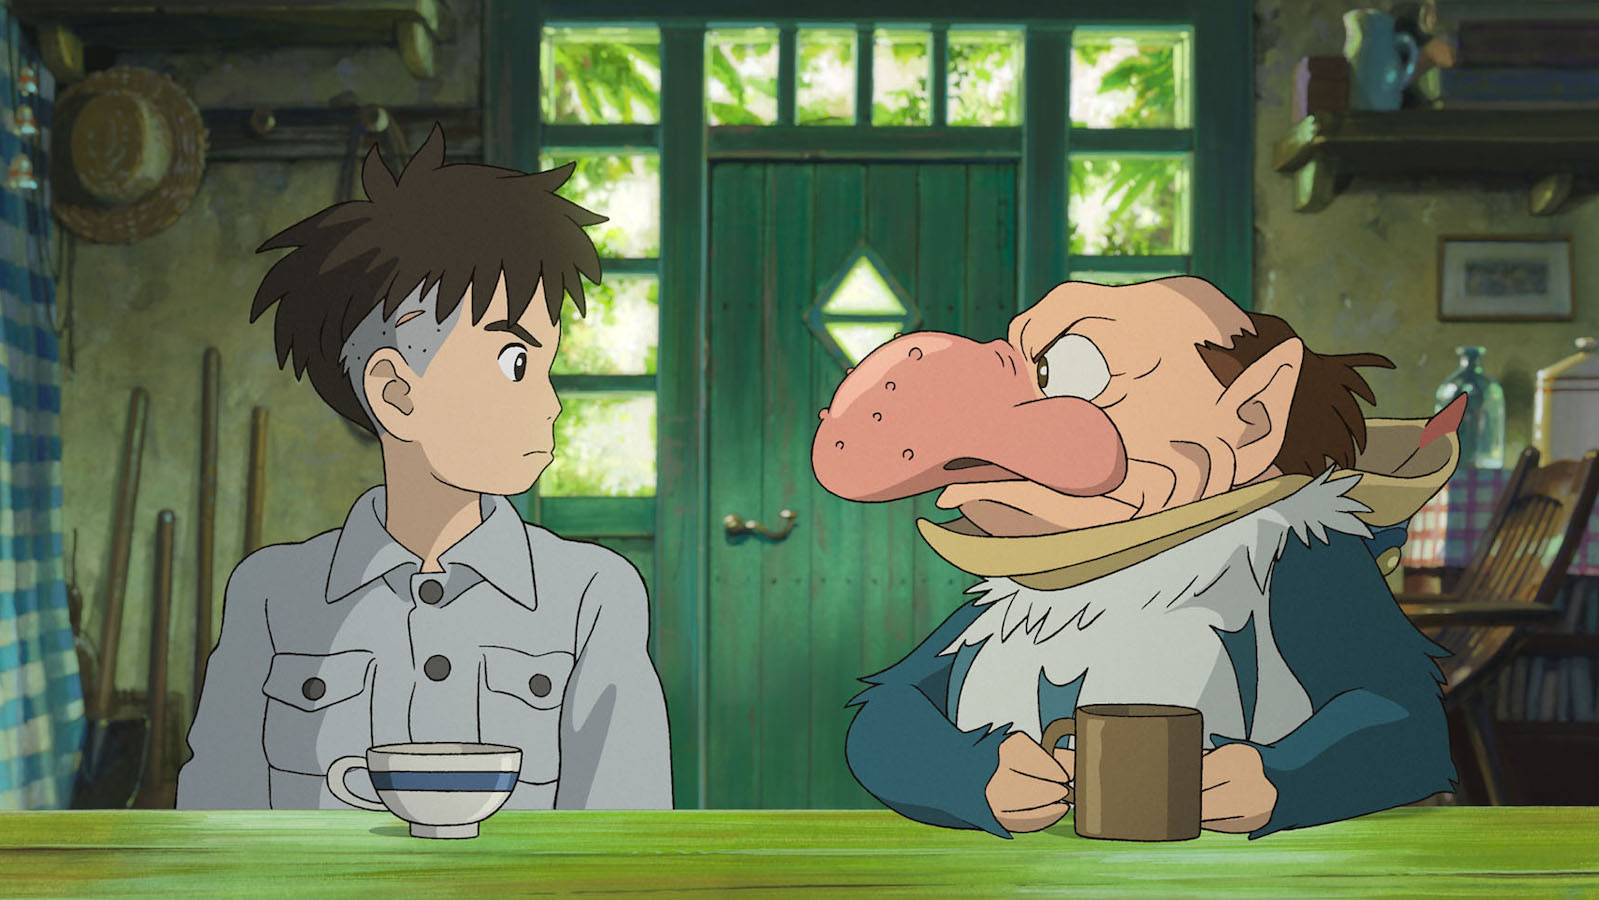 An animated image of a young boy and an older man in a big nose sitting at a table looking at each other with annoyed expressions; the older man clutches a coffee mug, the biy sits with a tea cup.